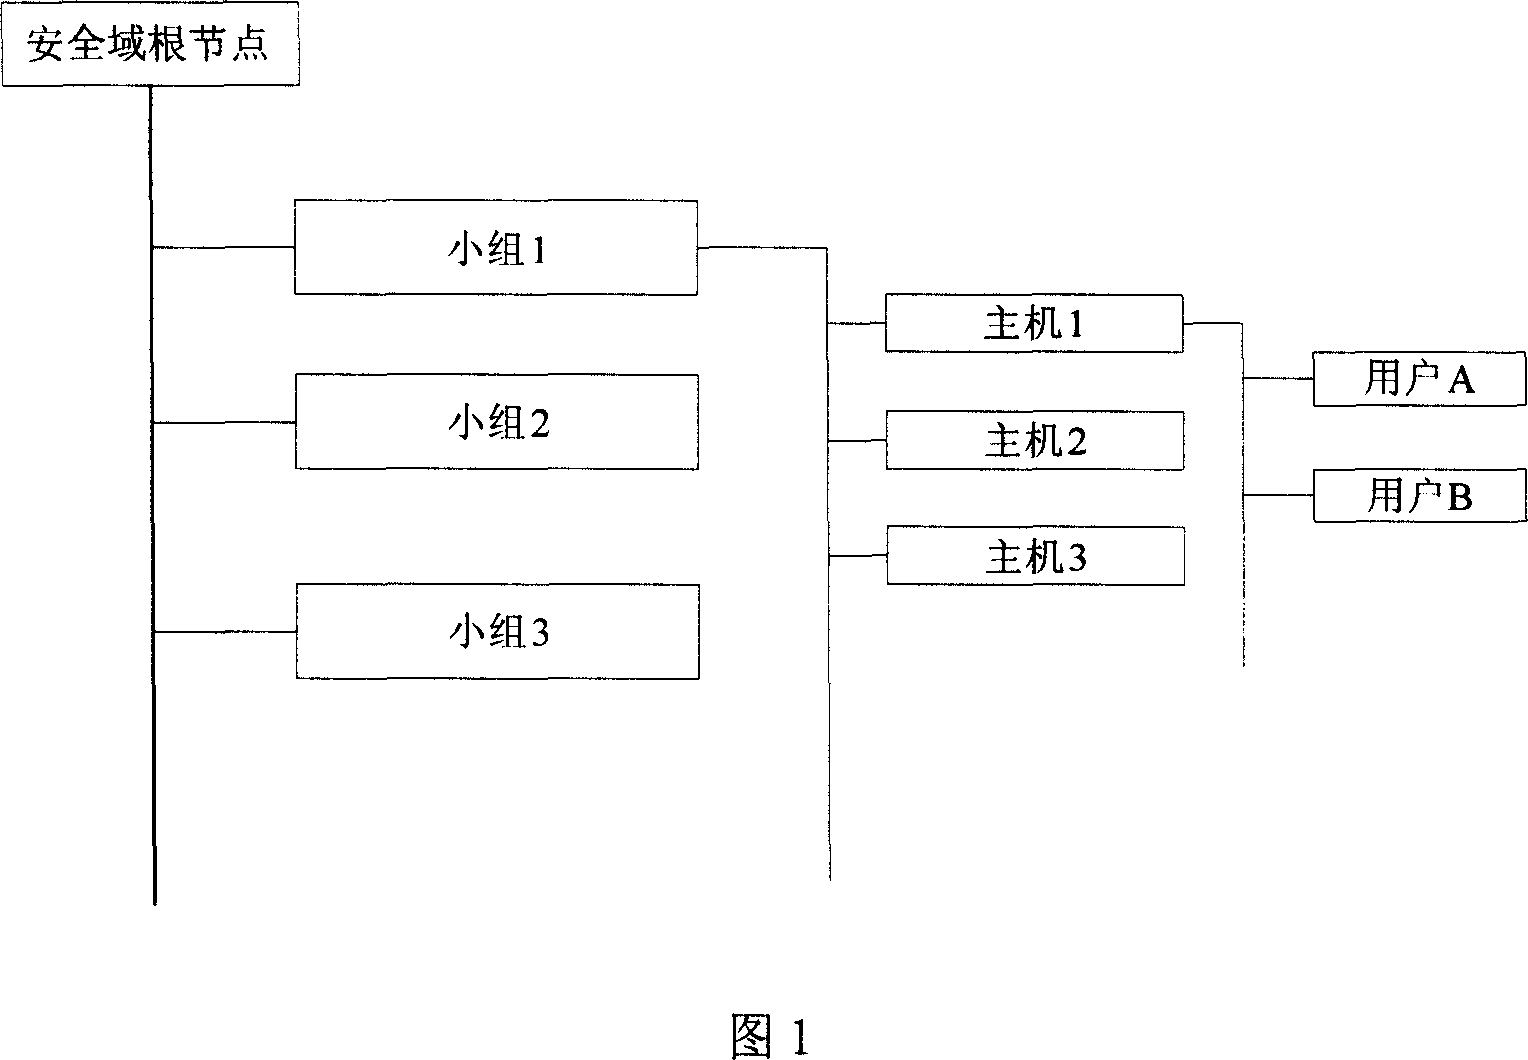 Mobile memory divulgence protection method and system